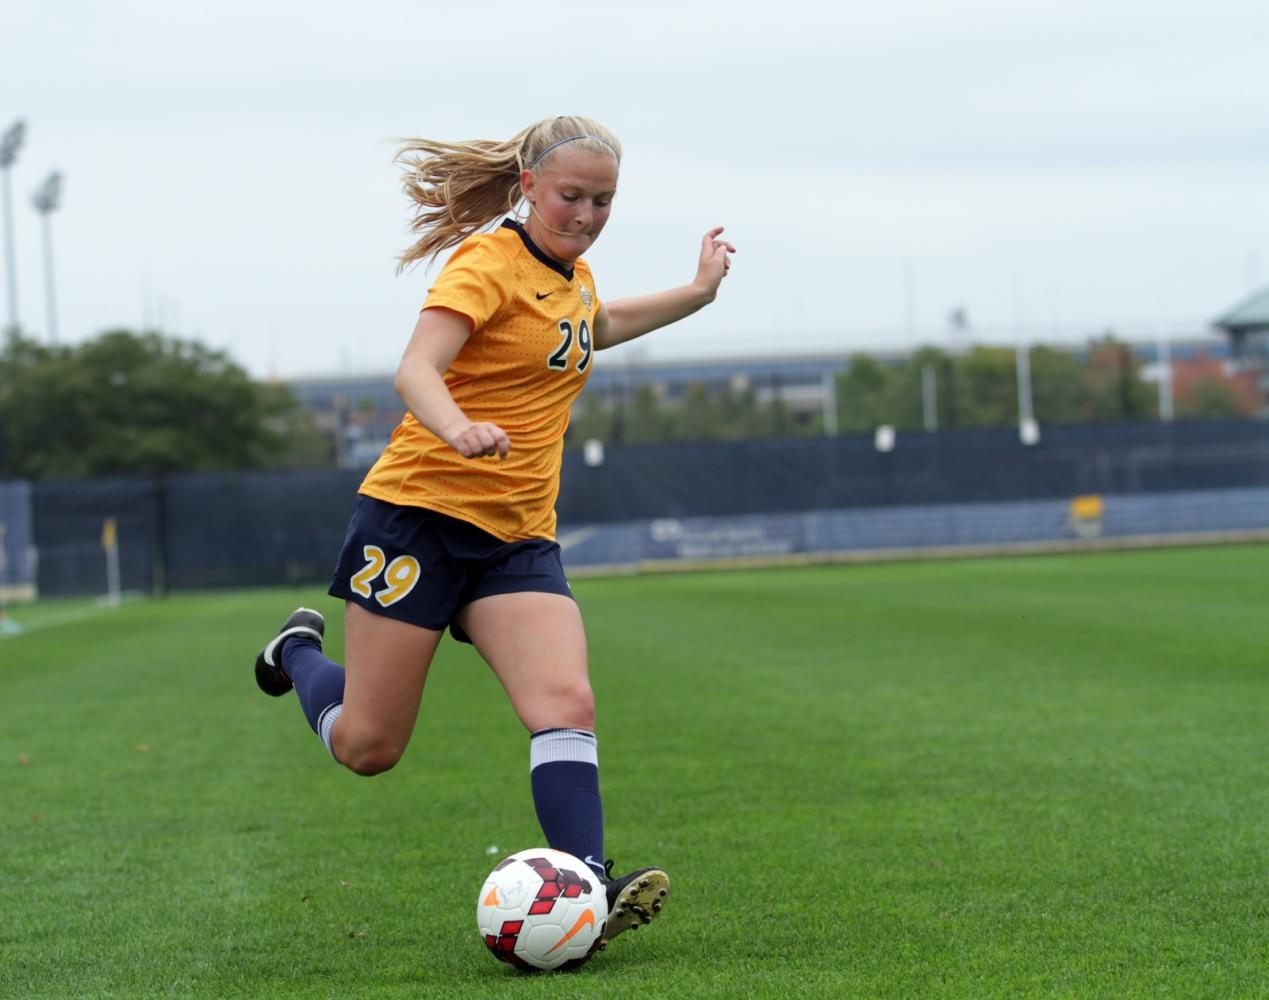 Allison Jacobson shares special bond with sisters over Marquette soccer